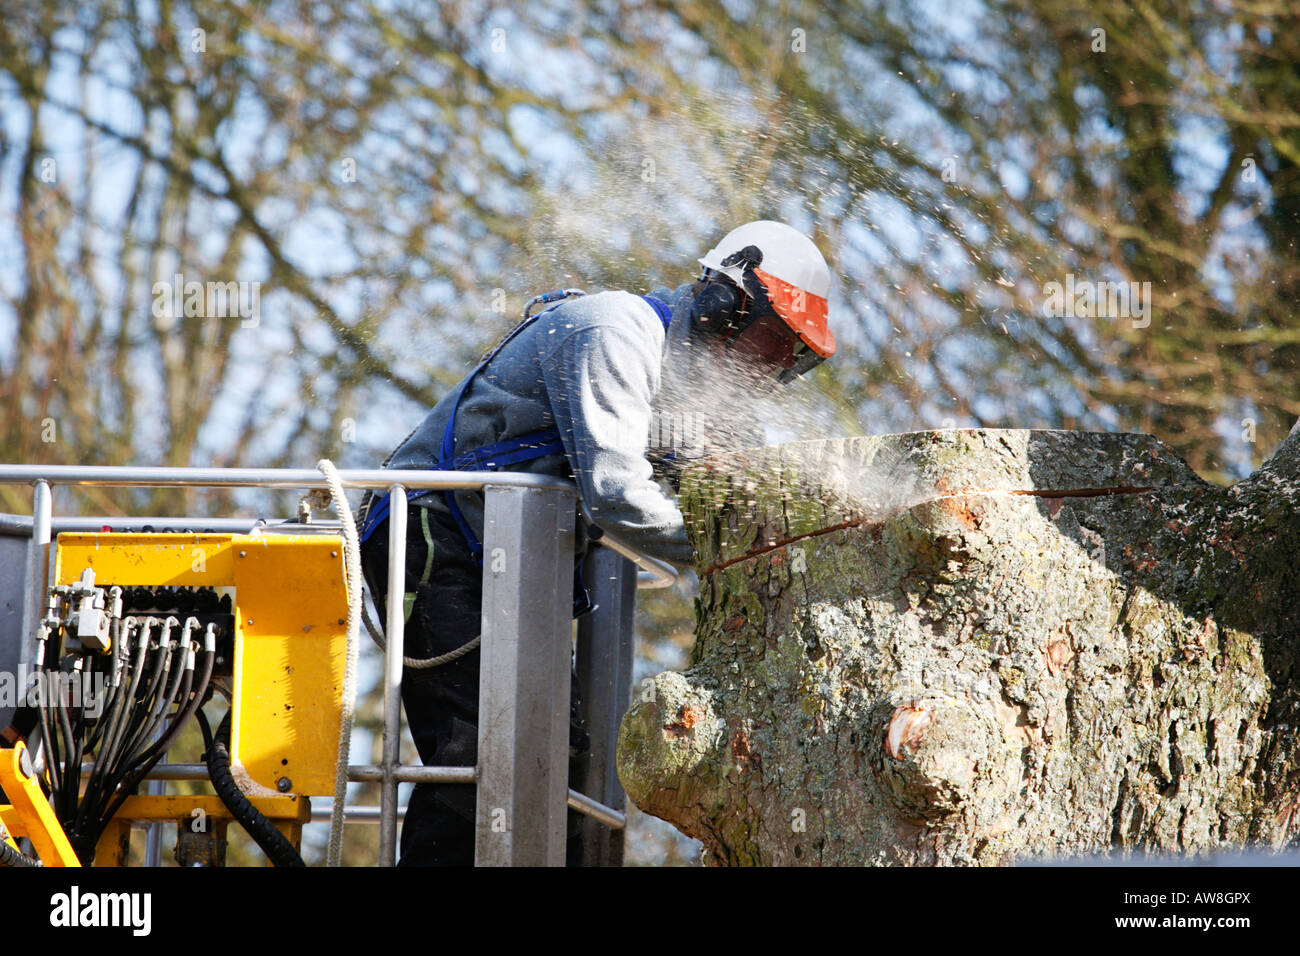 Tree Surgeon cutting down tree with chain saw standing in cherry picker Stock Photo